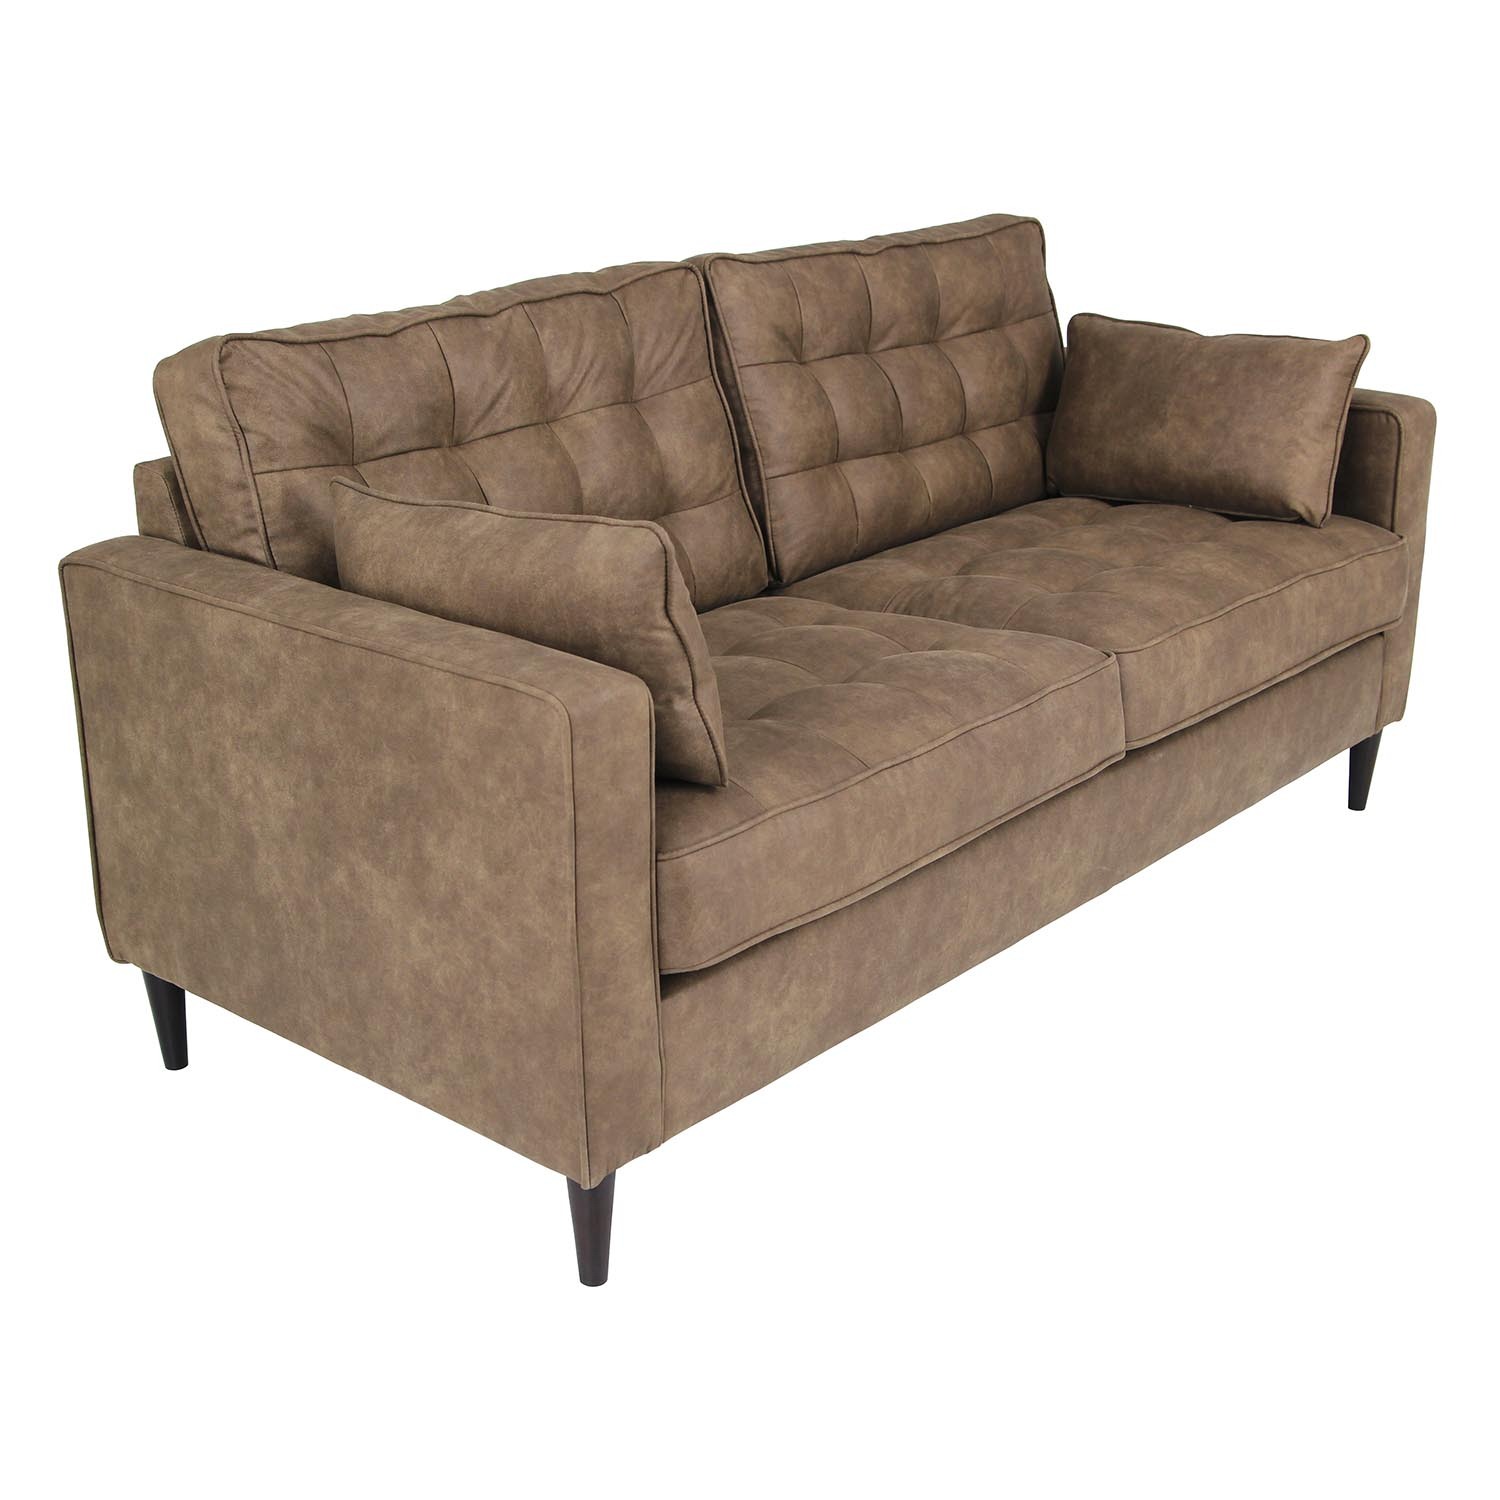 Anabelle 3 Seater Brown Fabric Sofa Image 3